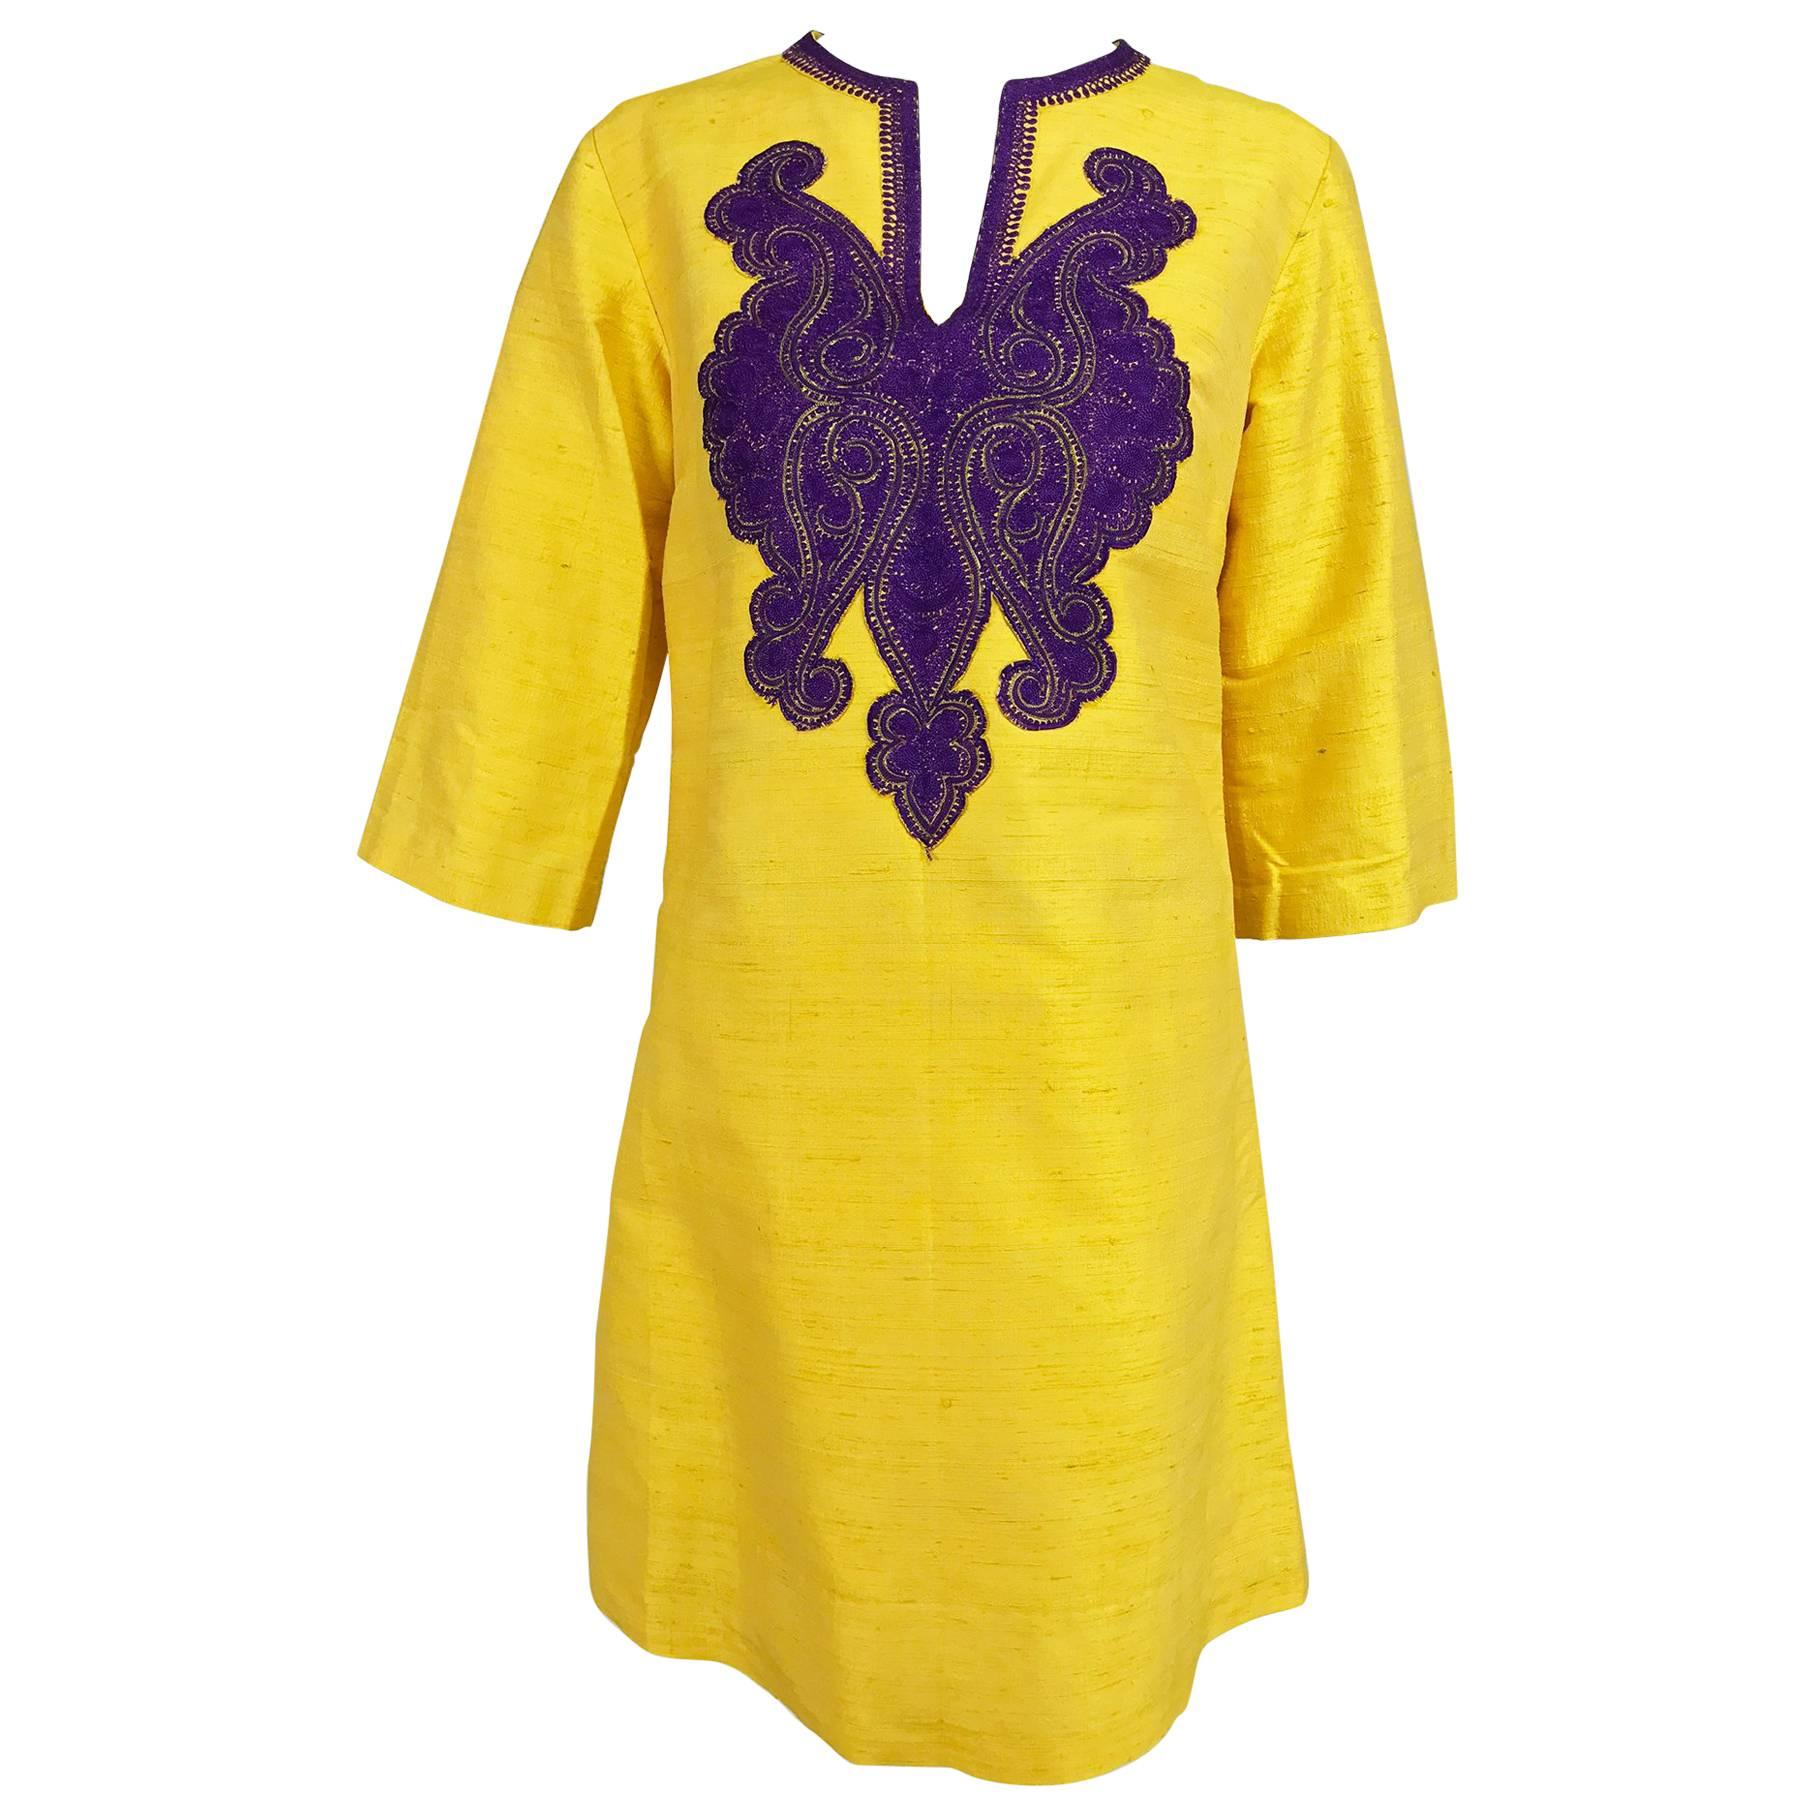 Vintage tunic of raw silk in saffron with purple embroidered applique 1960s